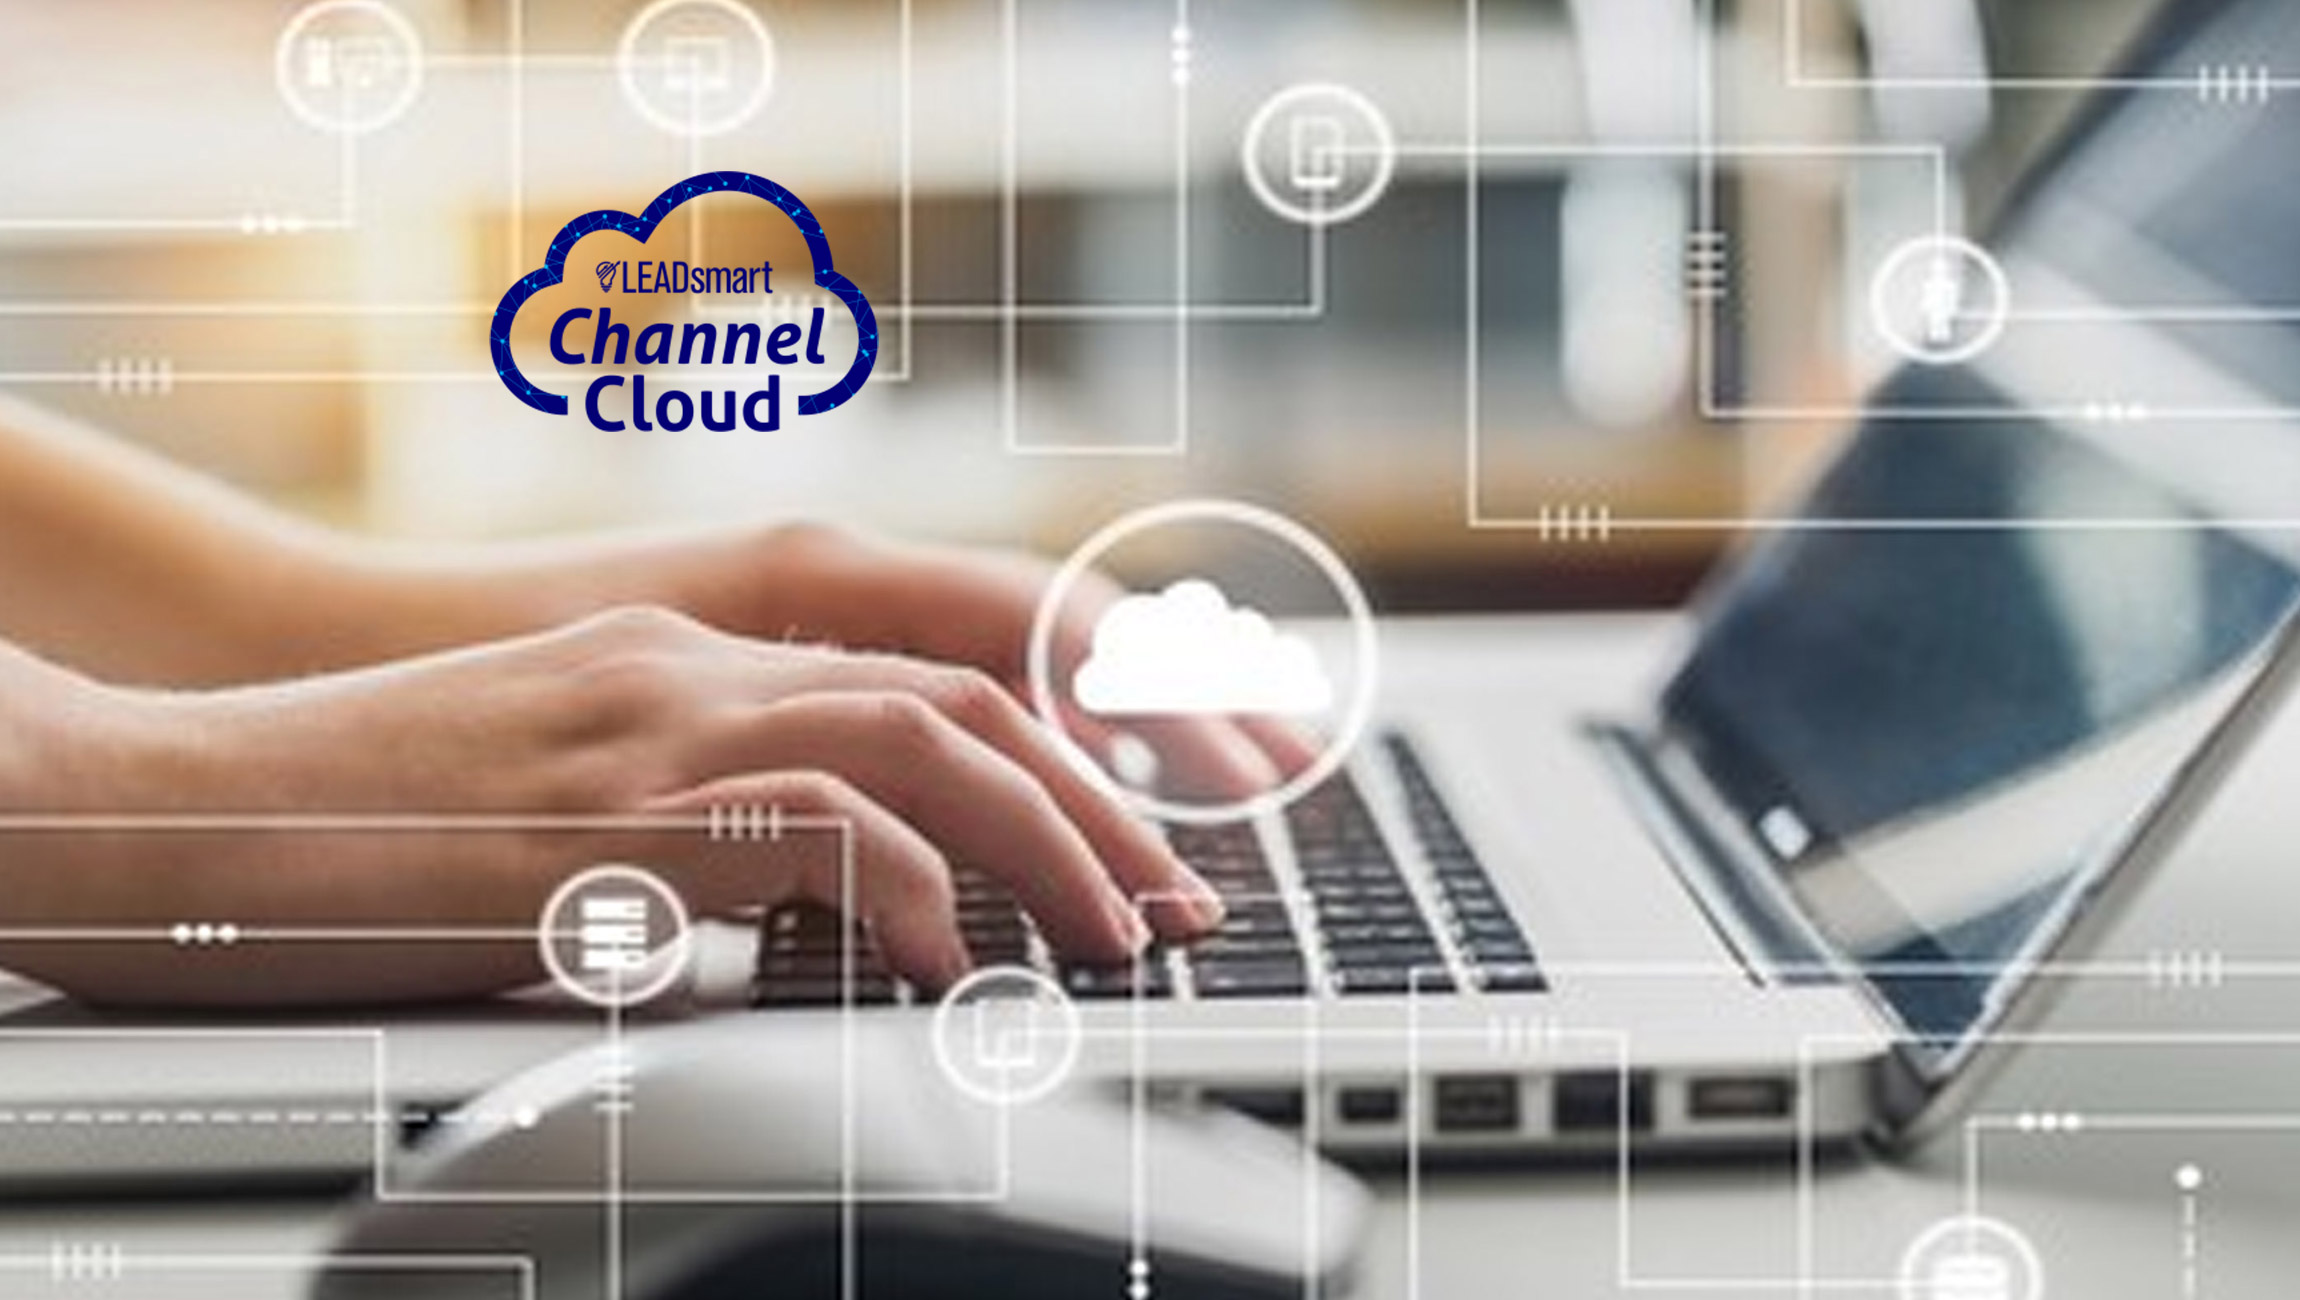 LeadSmart Technologies Releases New Channel Cloud for Distributors CRM and Business Intelligence Solution